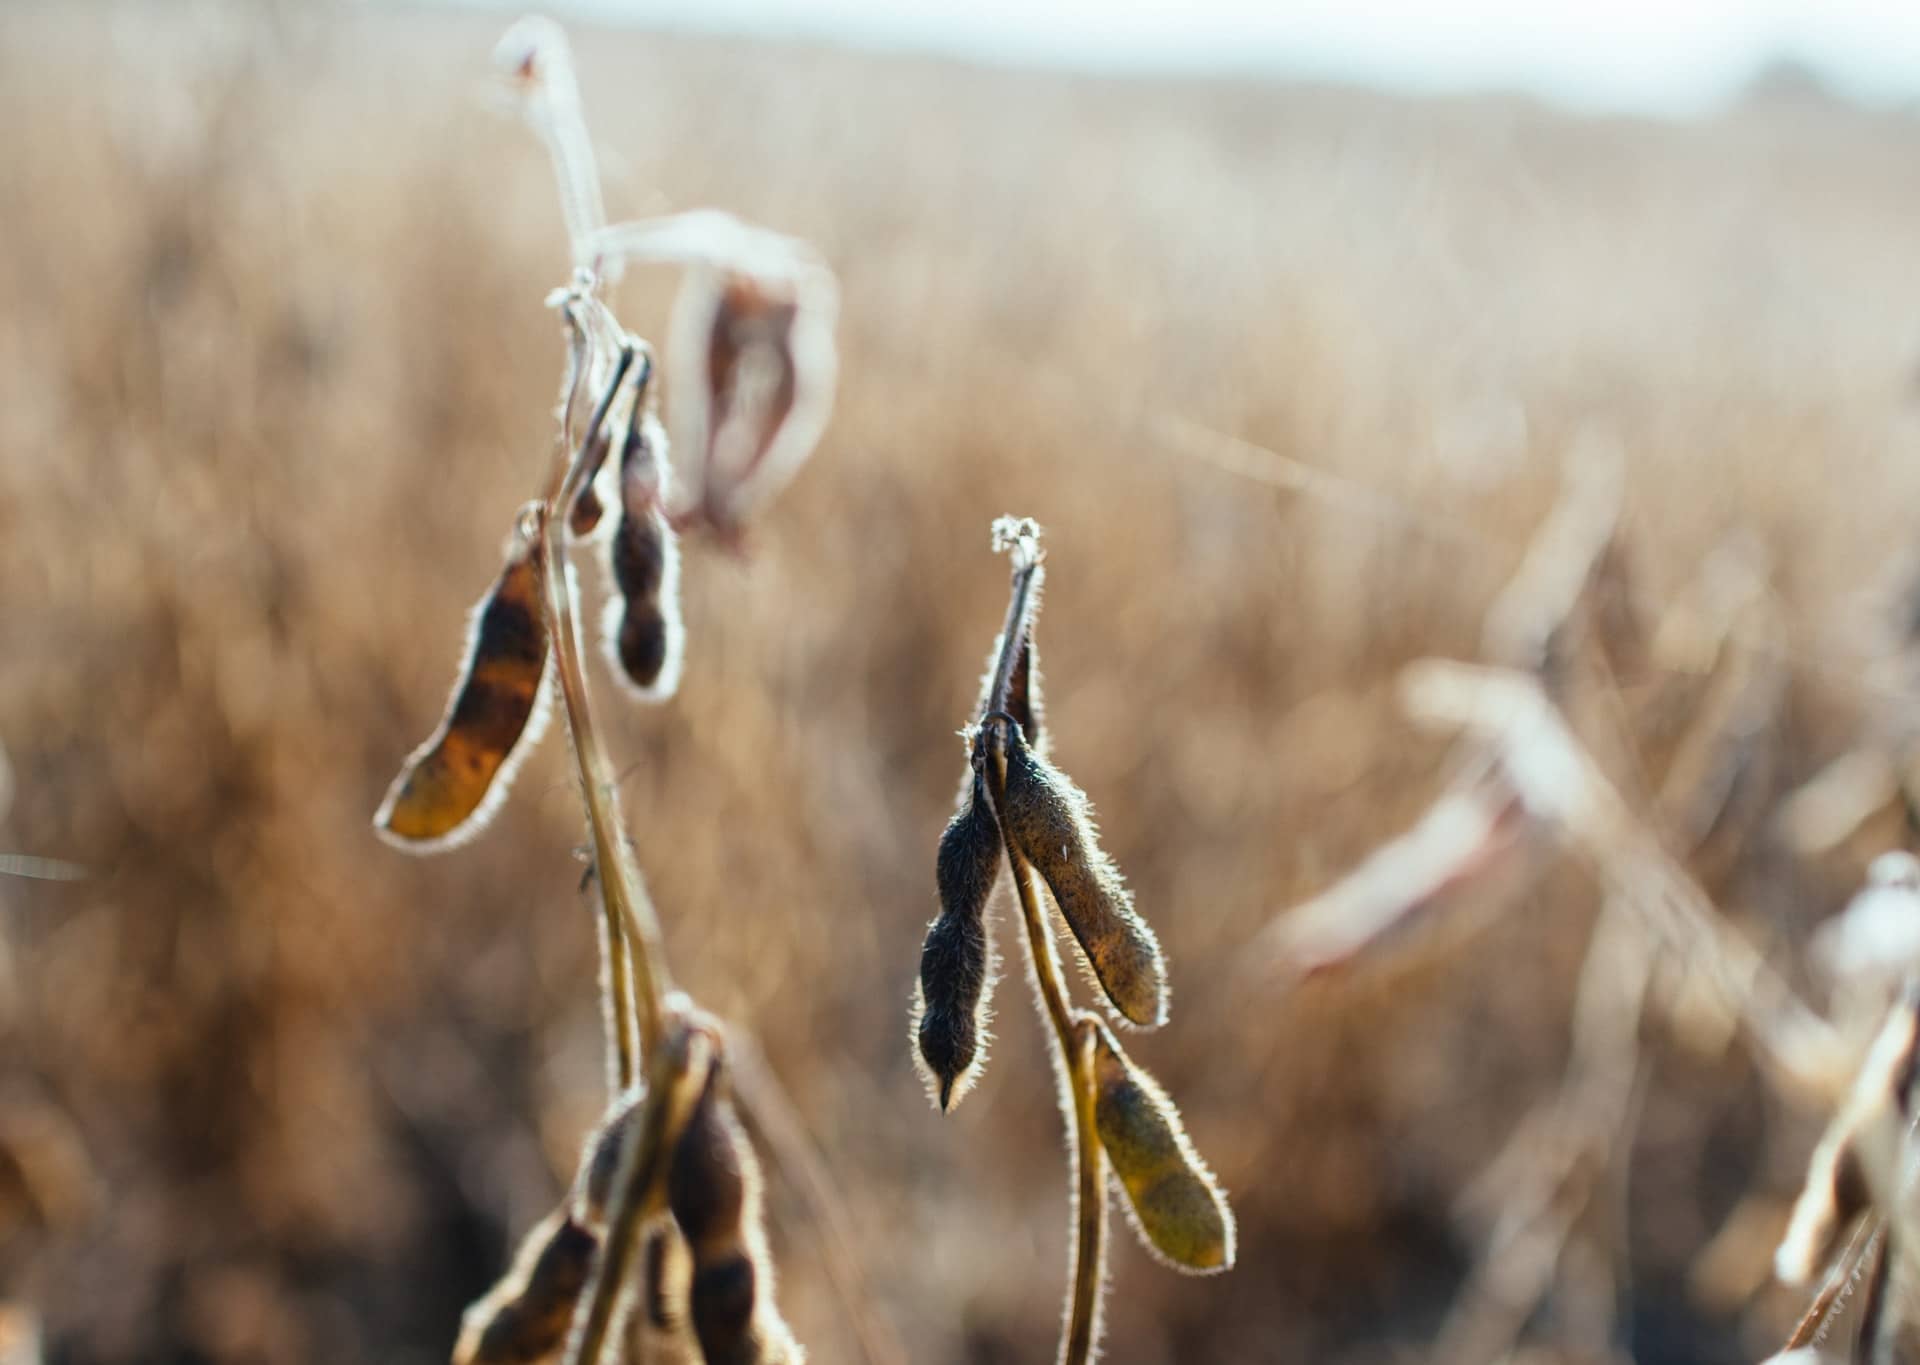 Soybeans growing on farm in the US